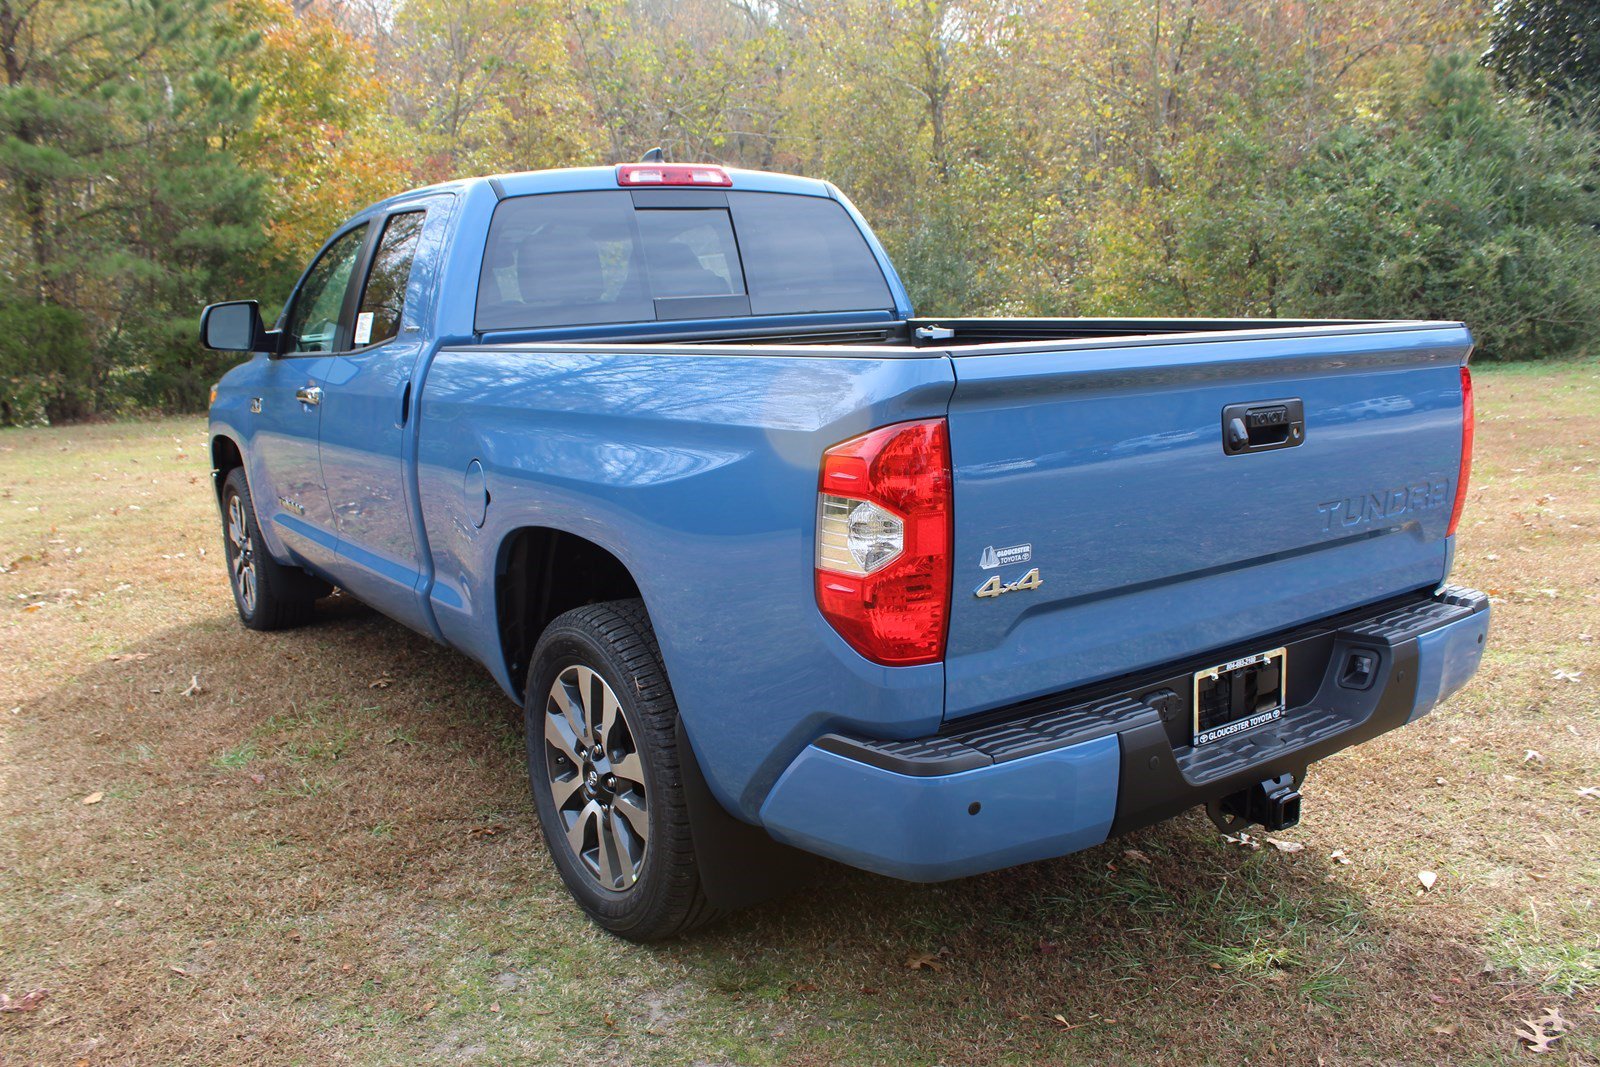 New 2020 Toyota Tundra 4WD Limited Crew Cab Pickup in Gloucester #9125